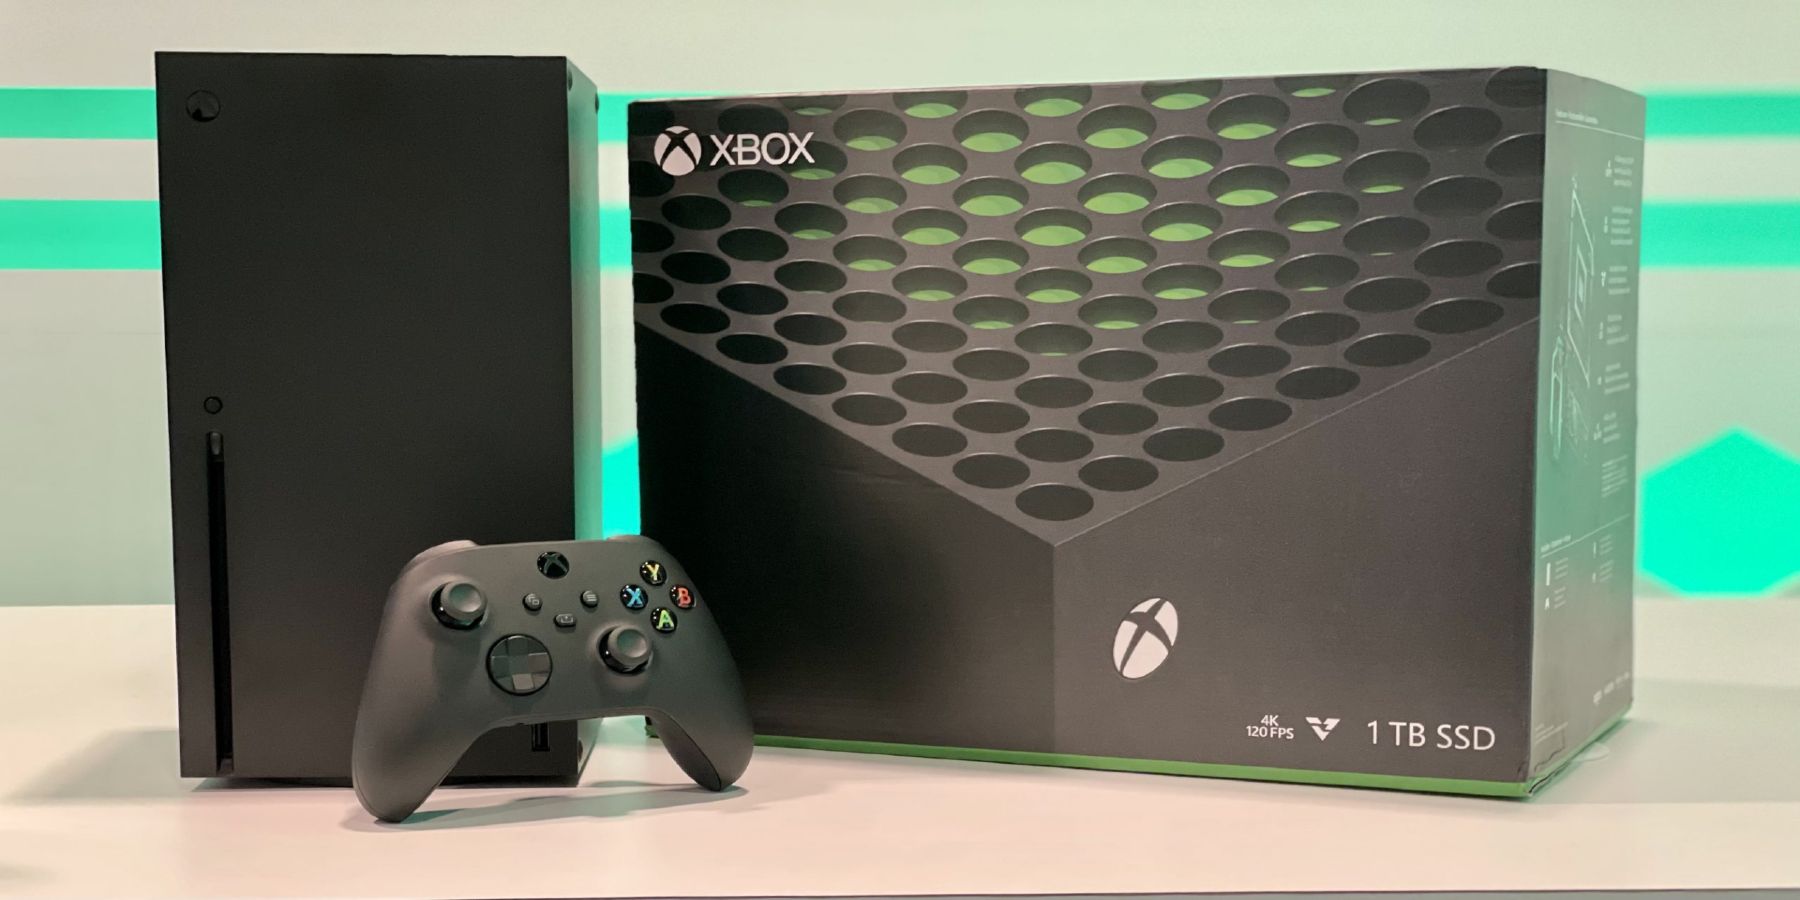 Boxed and unboxed versions of the Xbox Series X console.